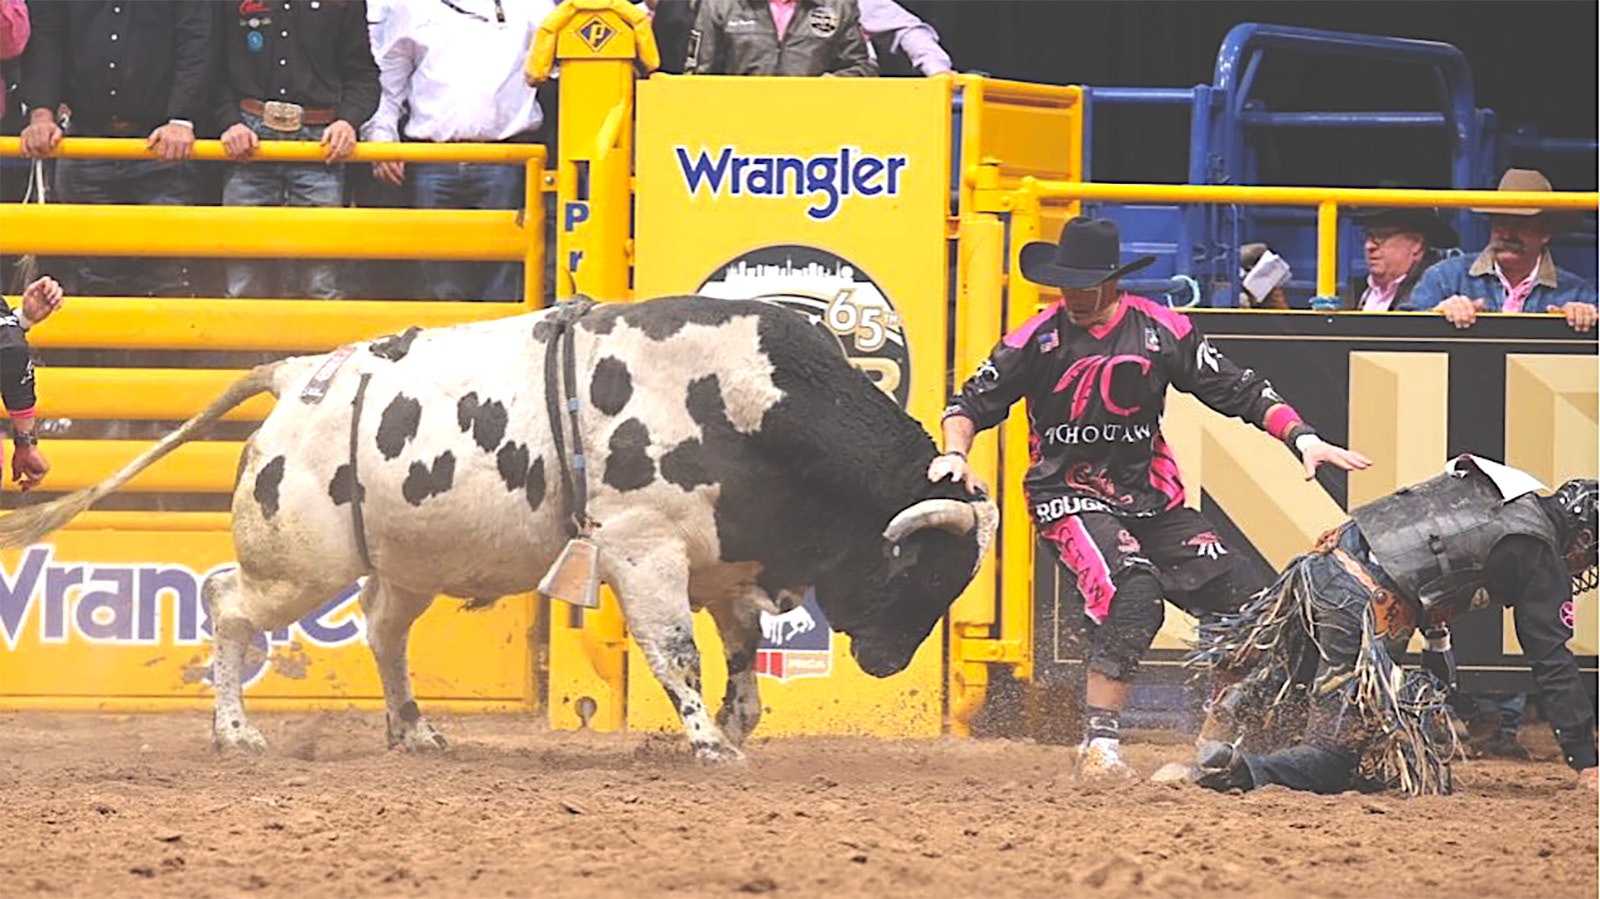 This is modern-day rodeo bullfighting at its finest — Dusty Tuckness steps into the gap to take on a bull and give a rider a chance to get away unharmed.